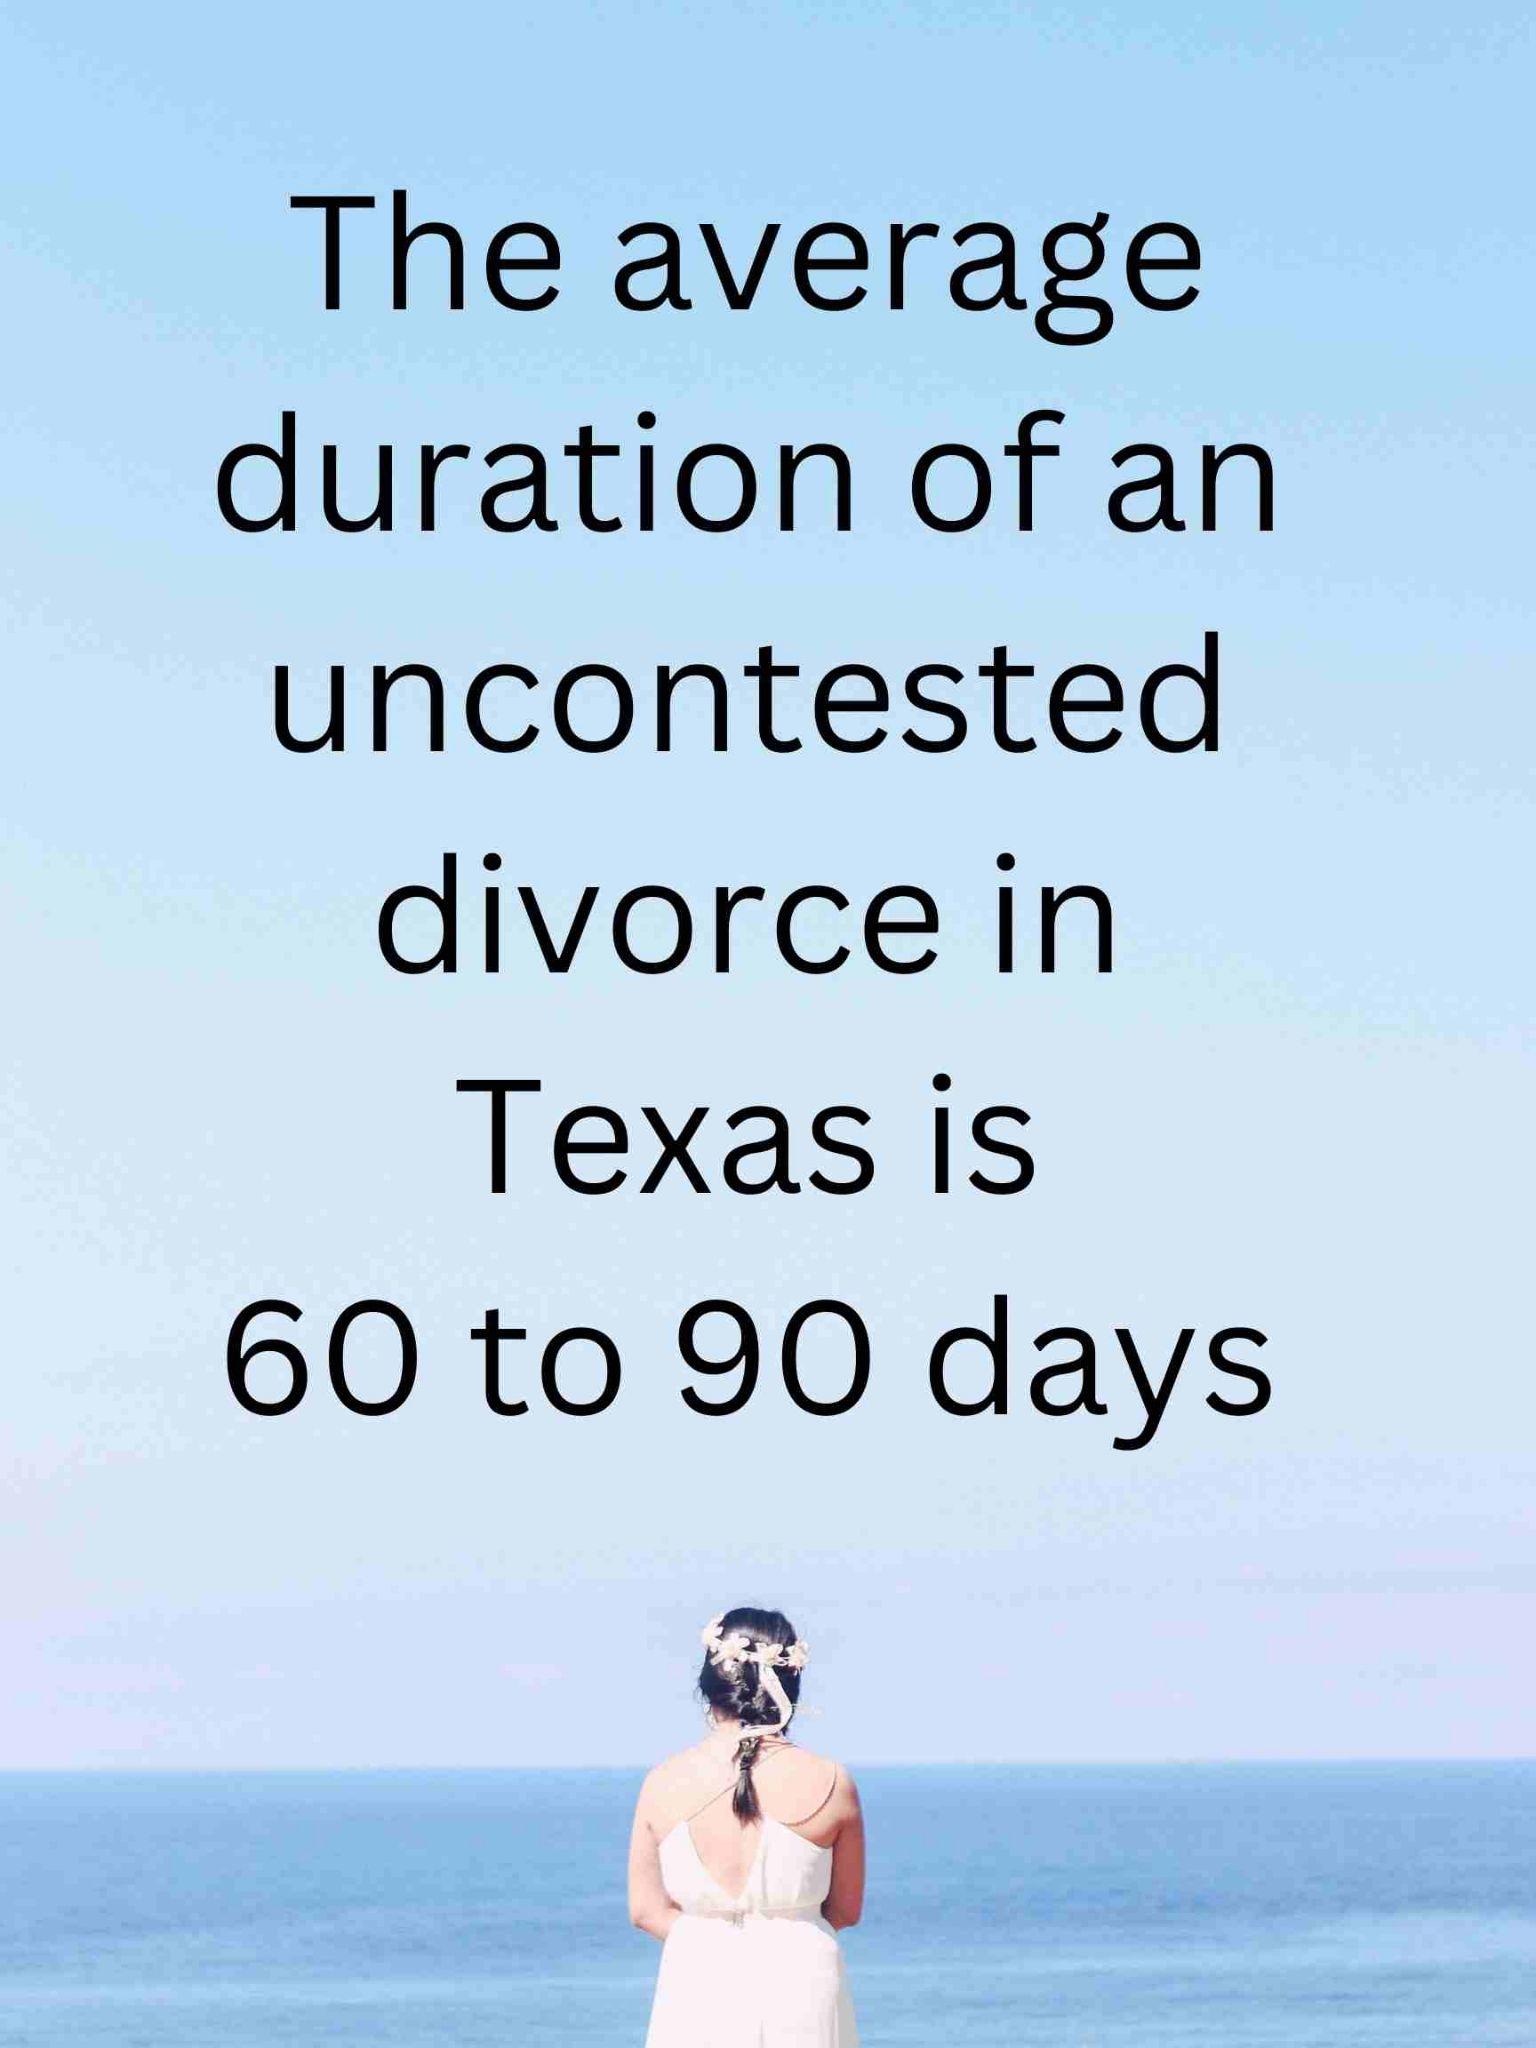 The image has text stating, "The average duration of an uncontested divorce in Texas is 60 to 90 days," with a person in a white outfit and hat facing the ocean. 